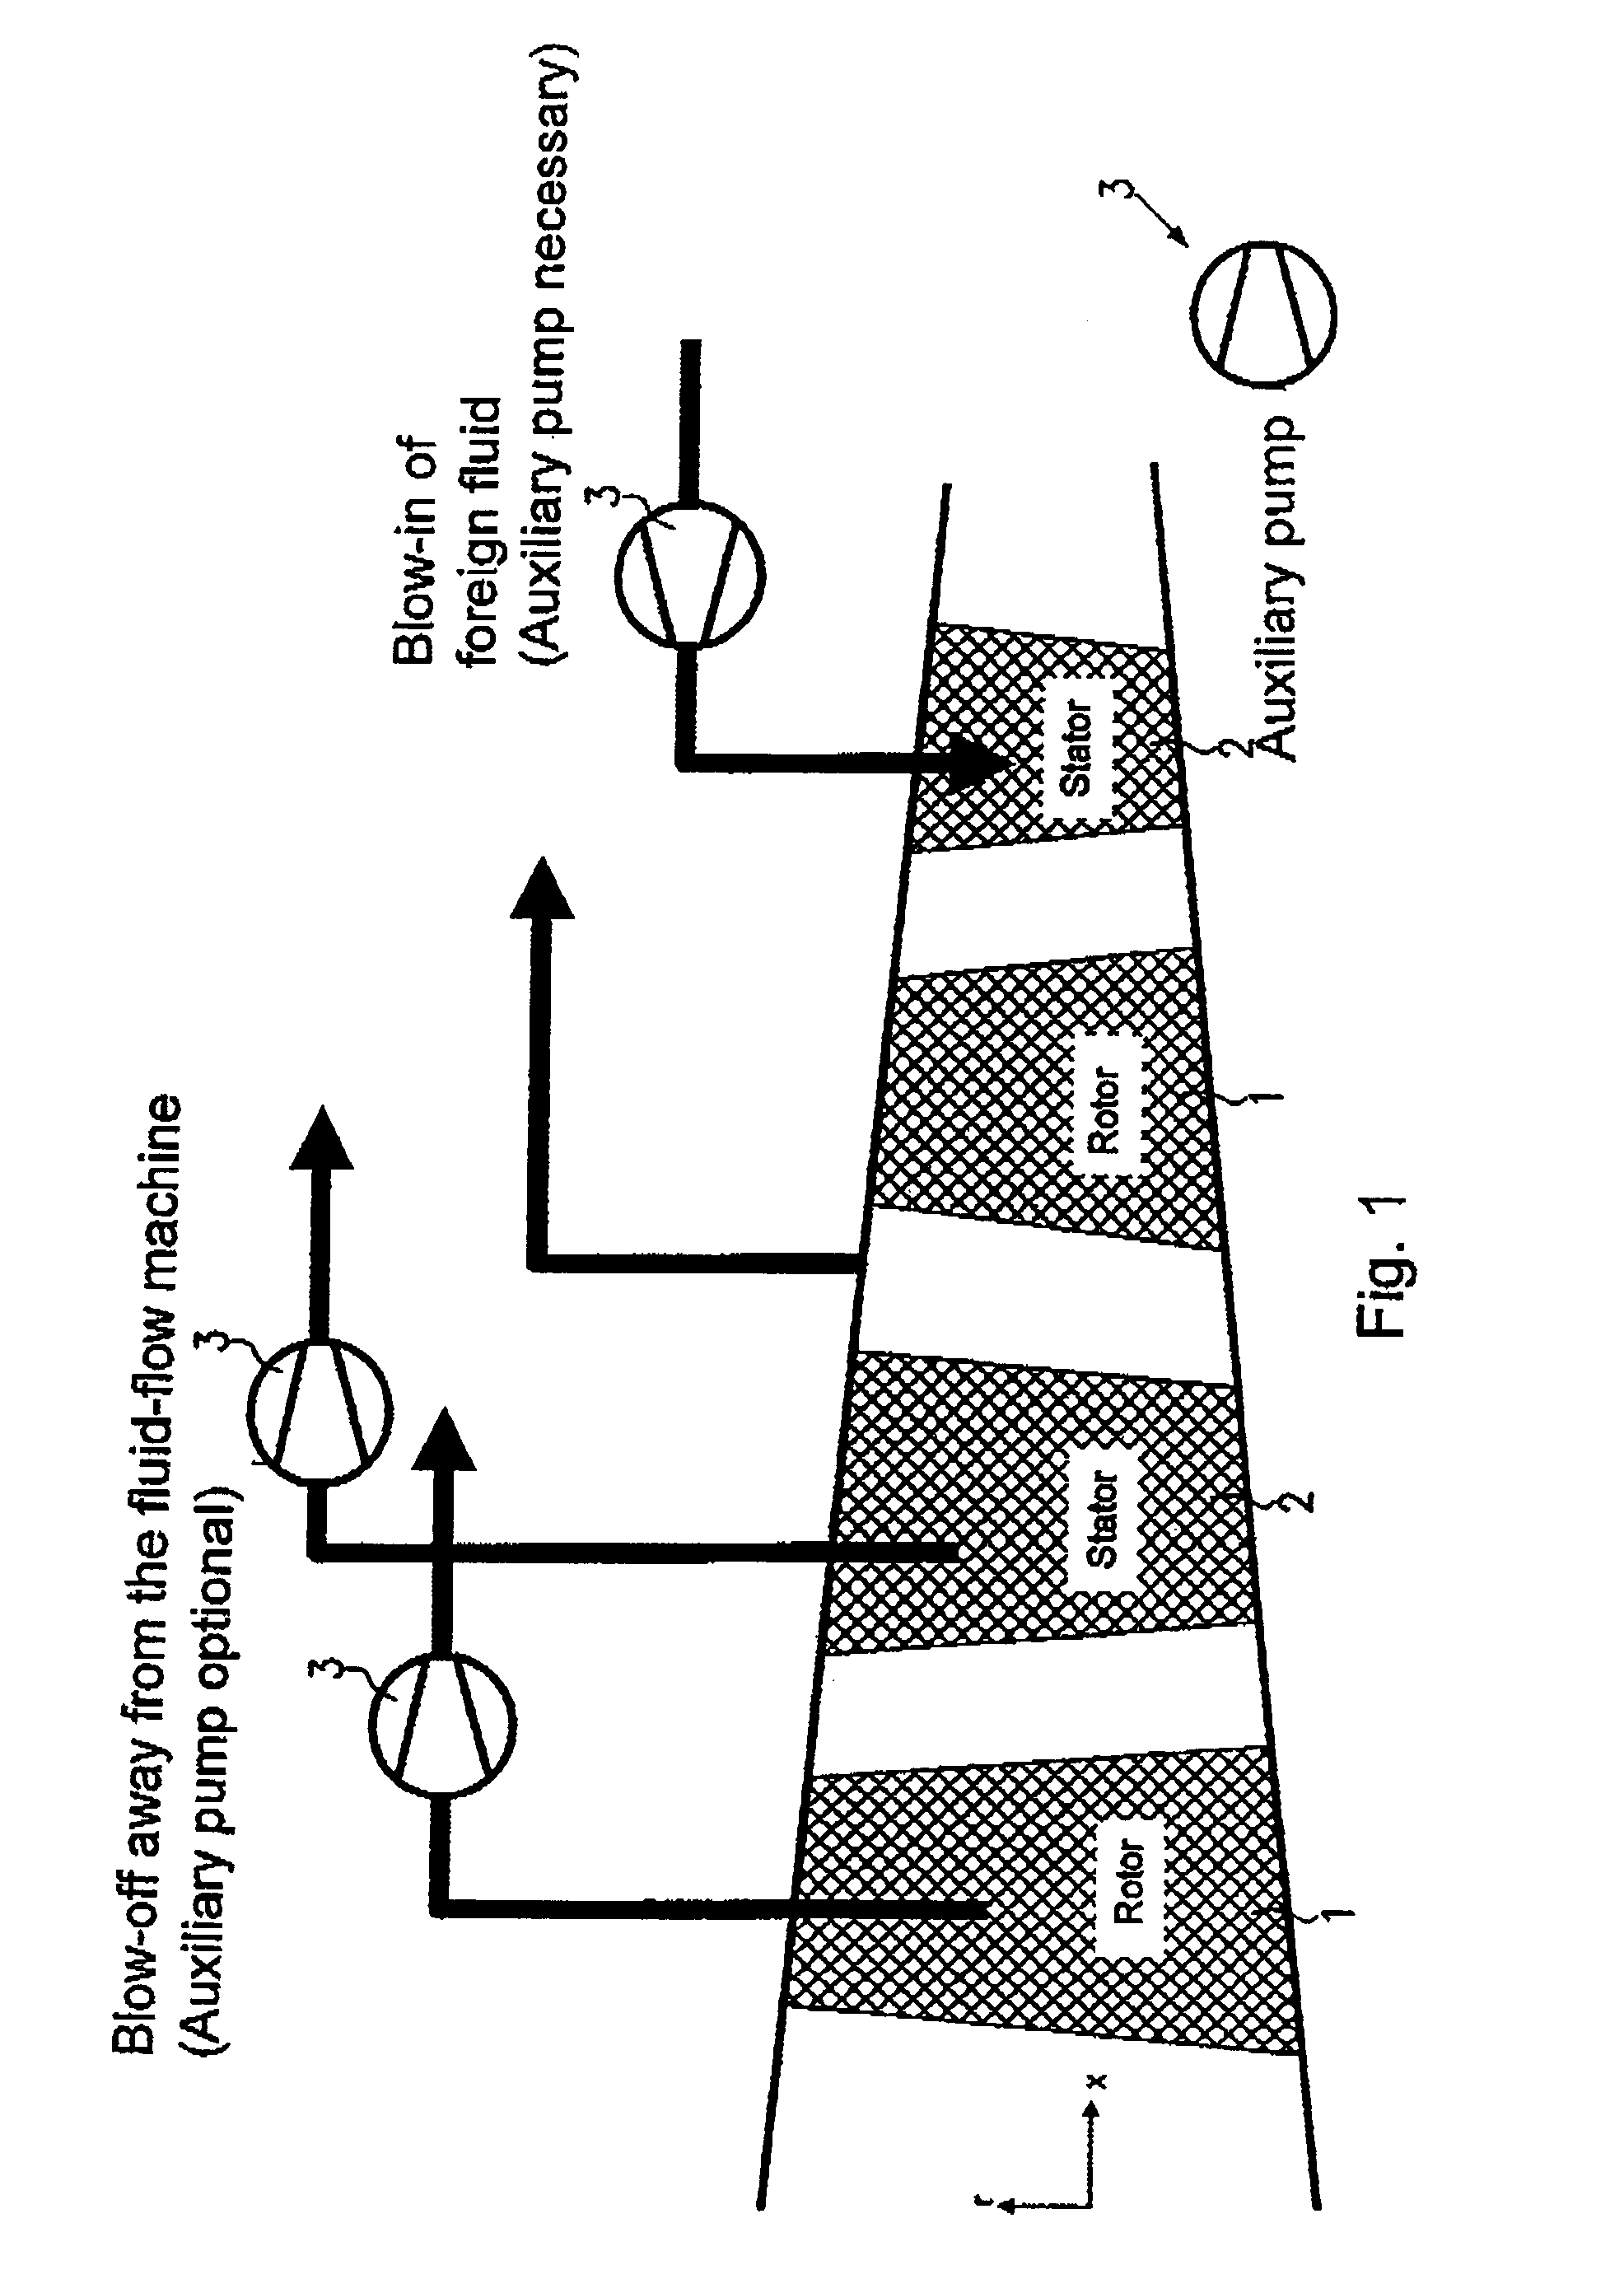 Fluid flow machine with integrated fluid circulation system